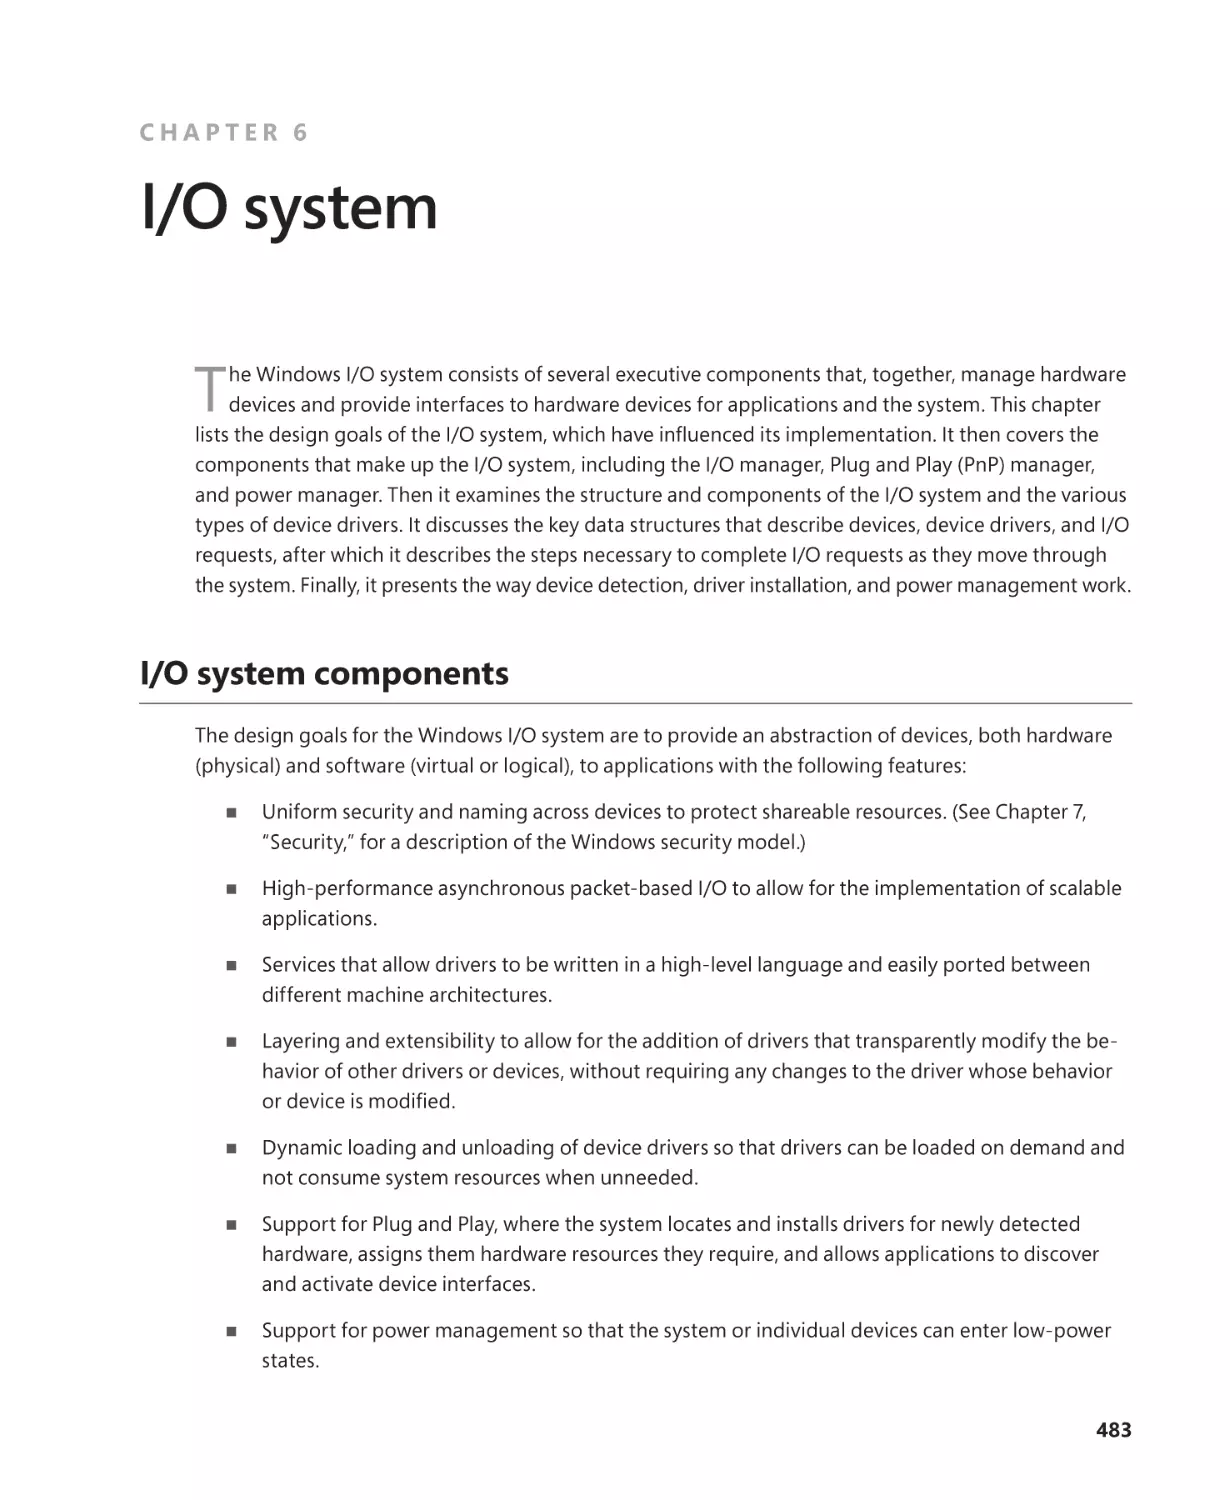 Chapter 6 I/O system
I/O system components